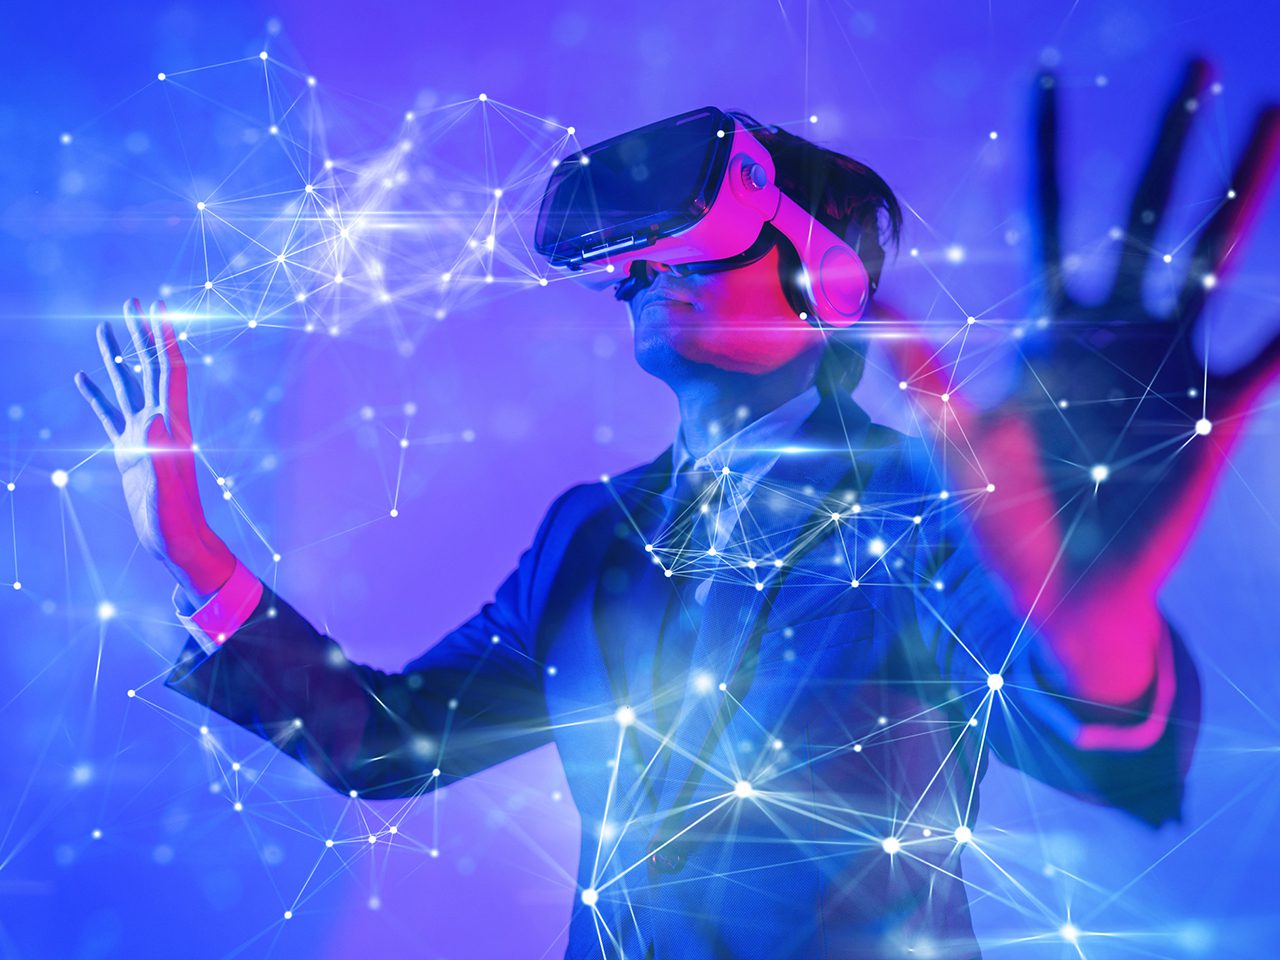 Metaverse digital cyber world technology, man wearing VR virtual reality glasses playing AR augmented reality game and entertainment, futuristic lifestyle